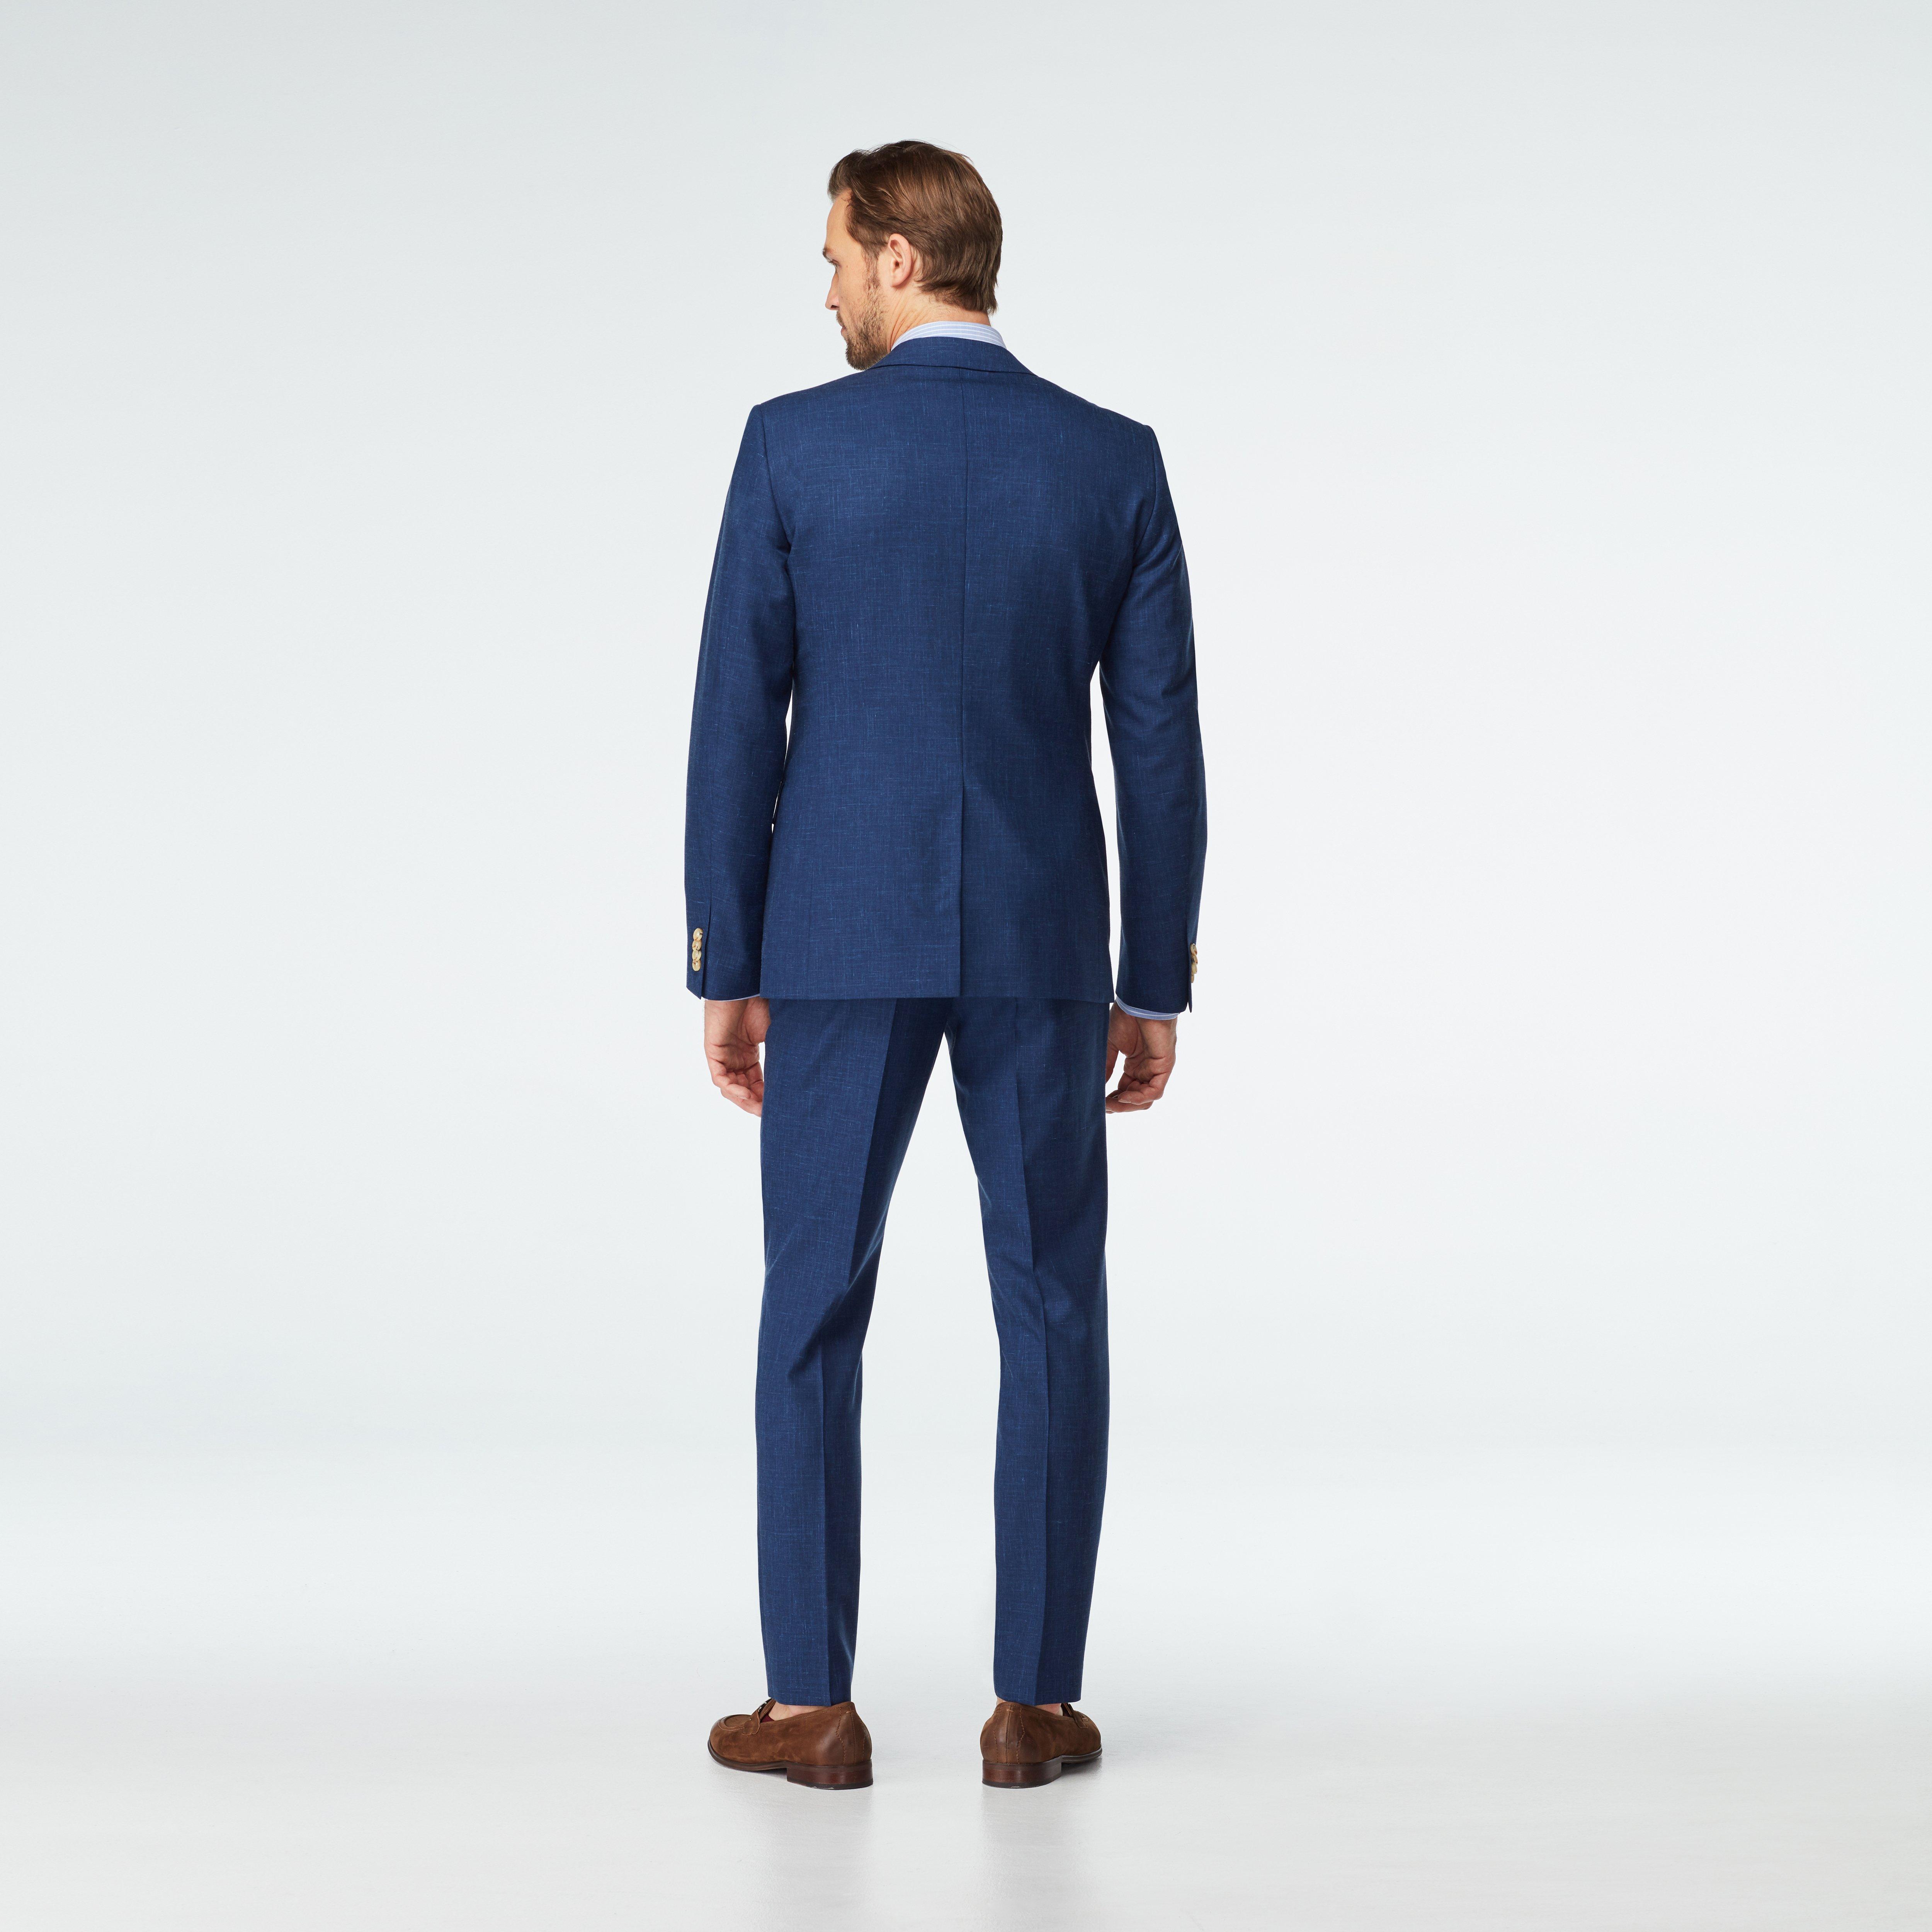 Custom Suits Made For You - Stockport Wool Linen Blue Suit | INDOCHINO